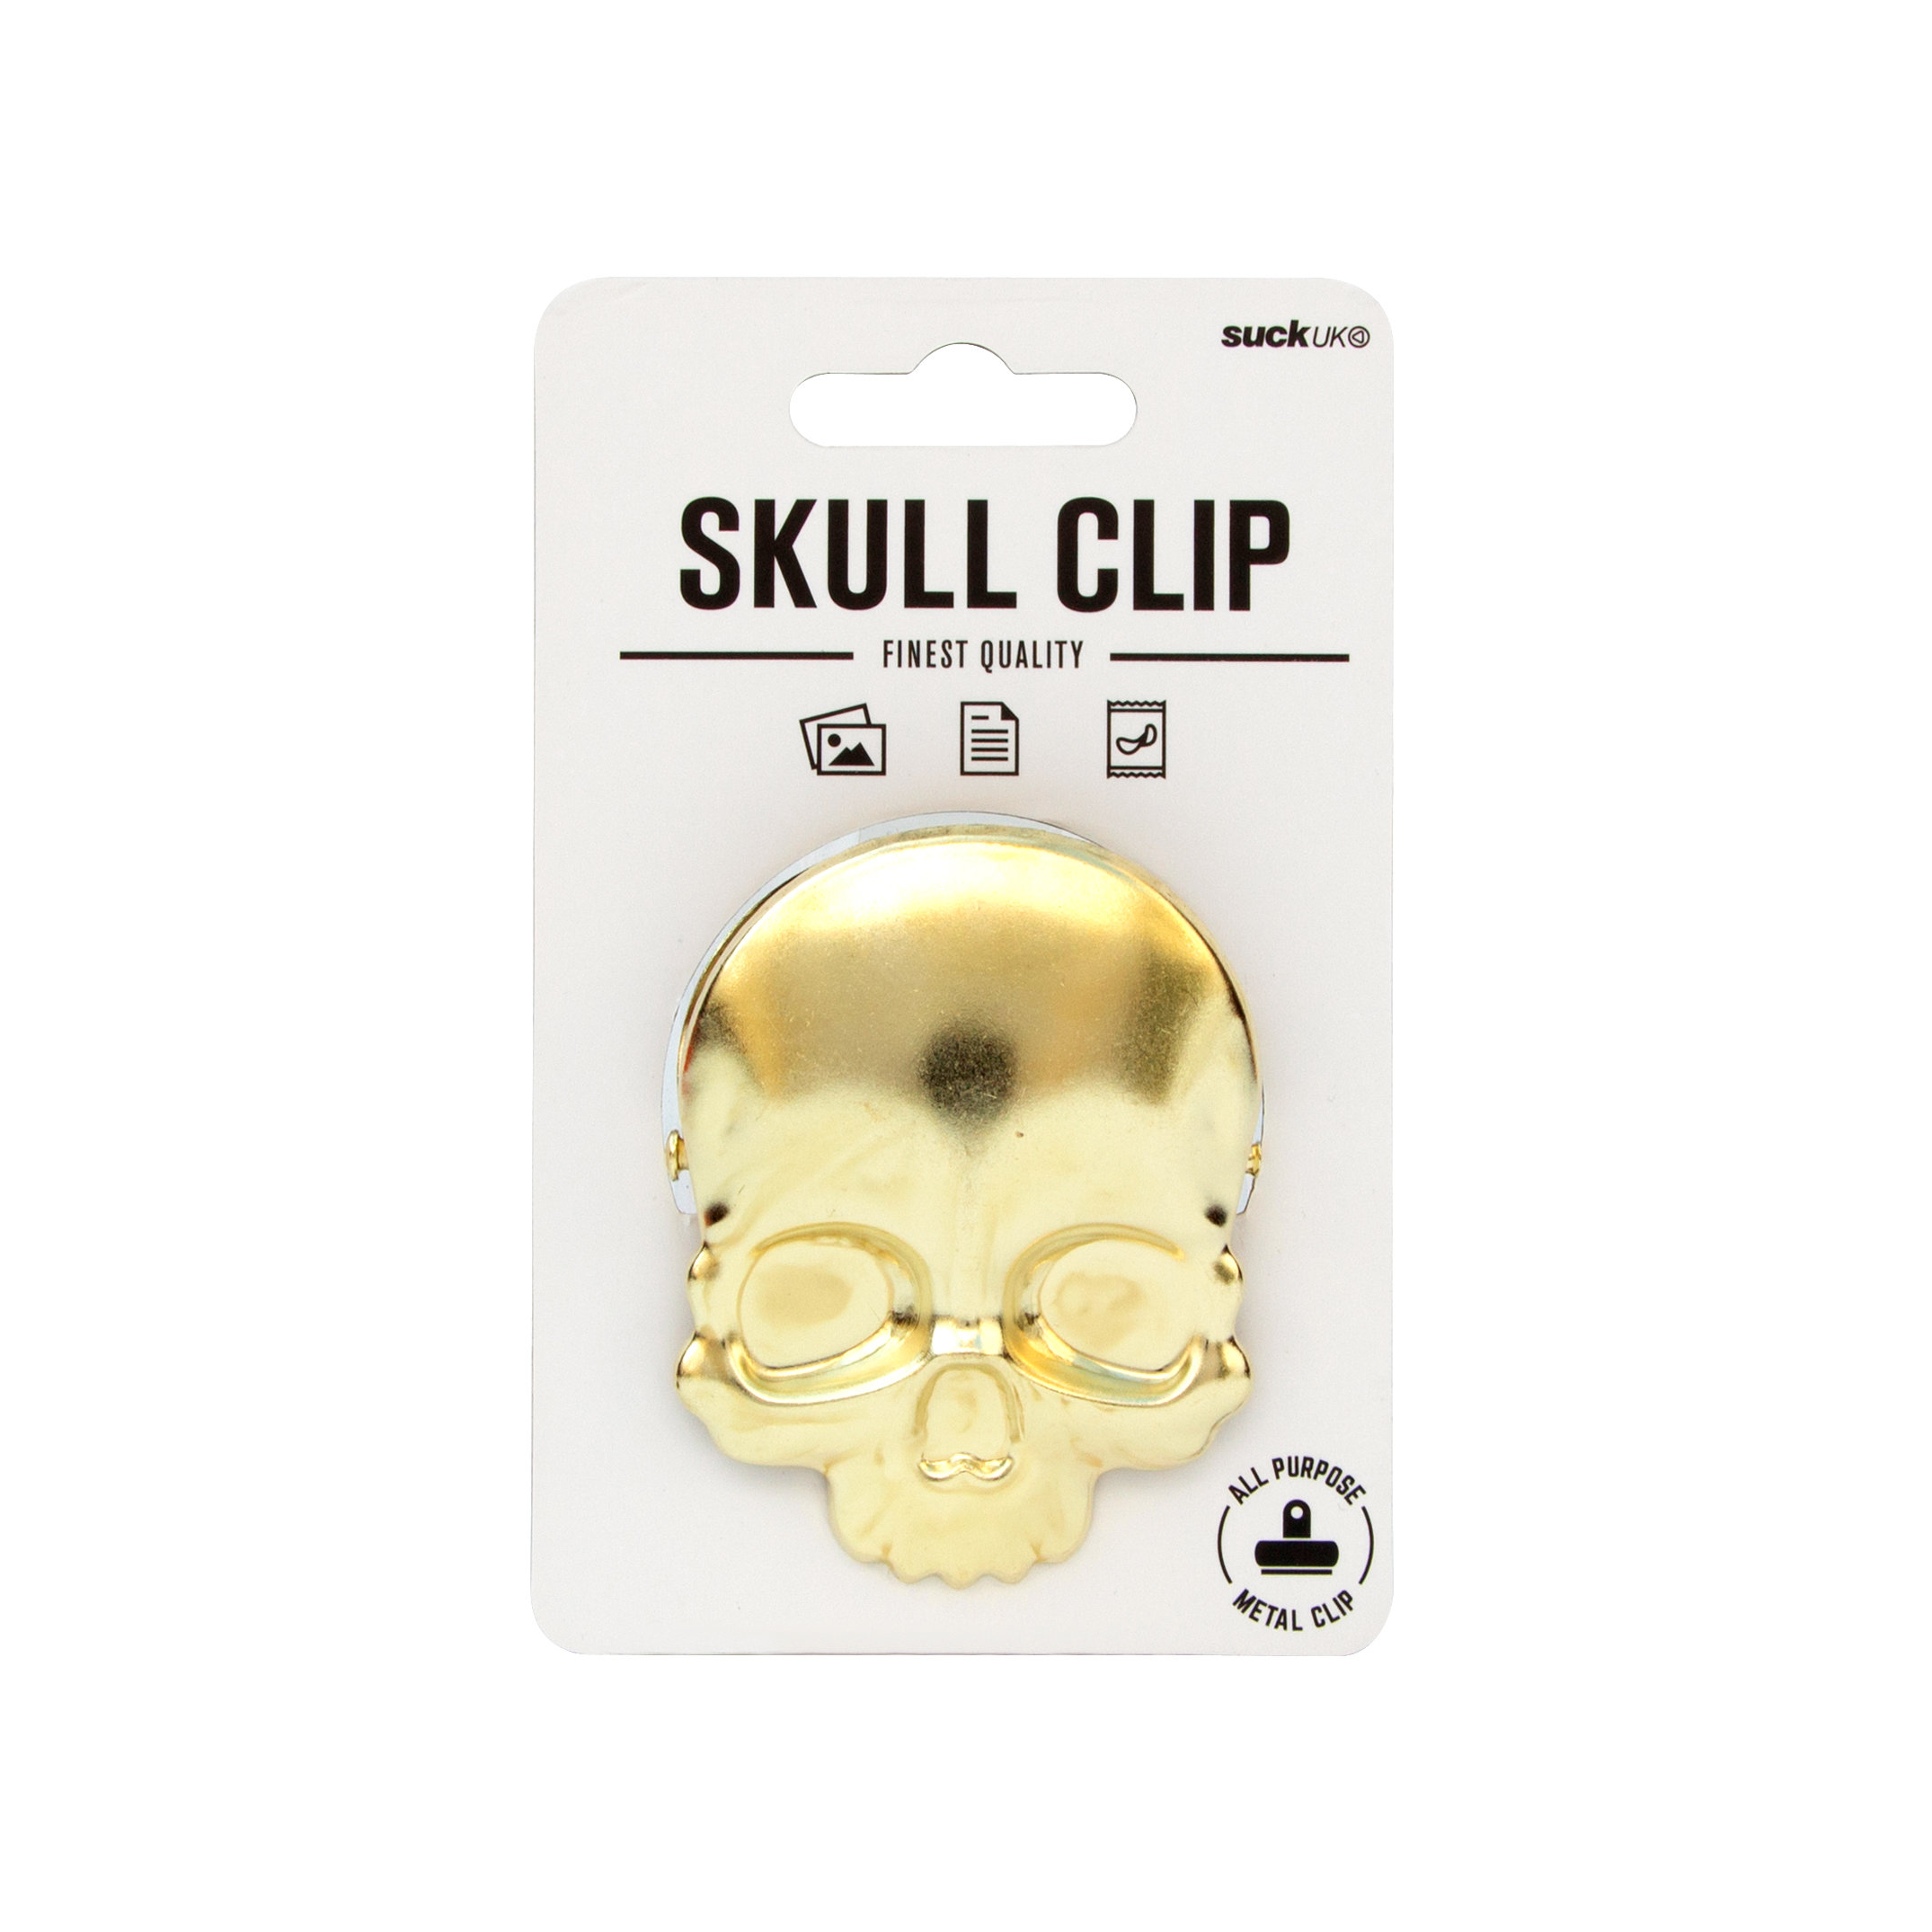 Brass skull clip for sealing food and organising paperwork